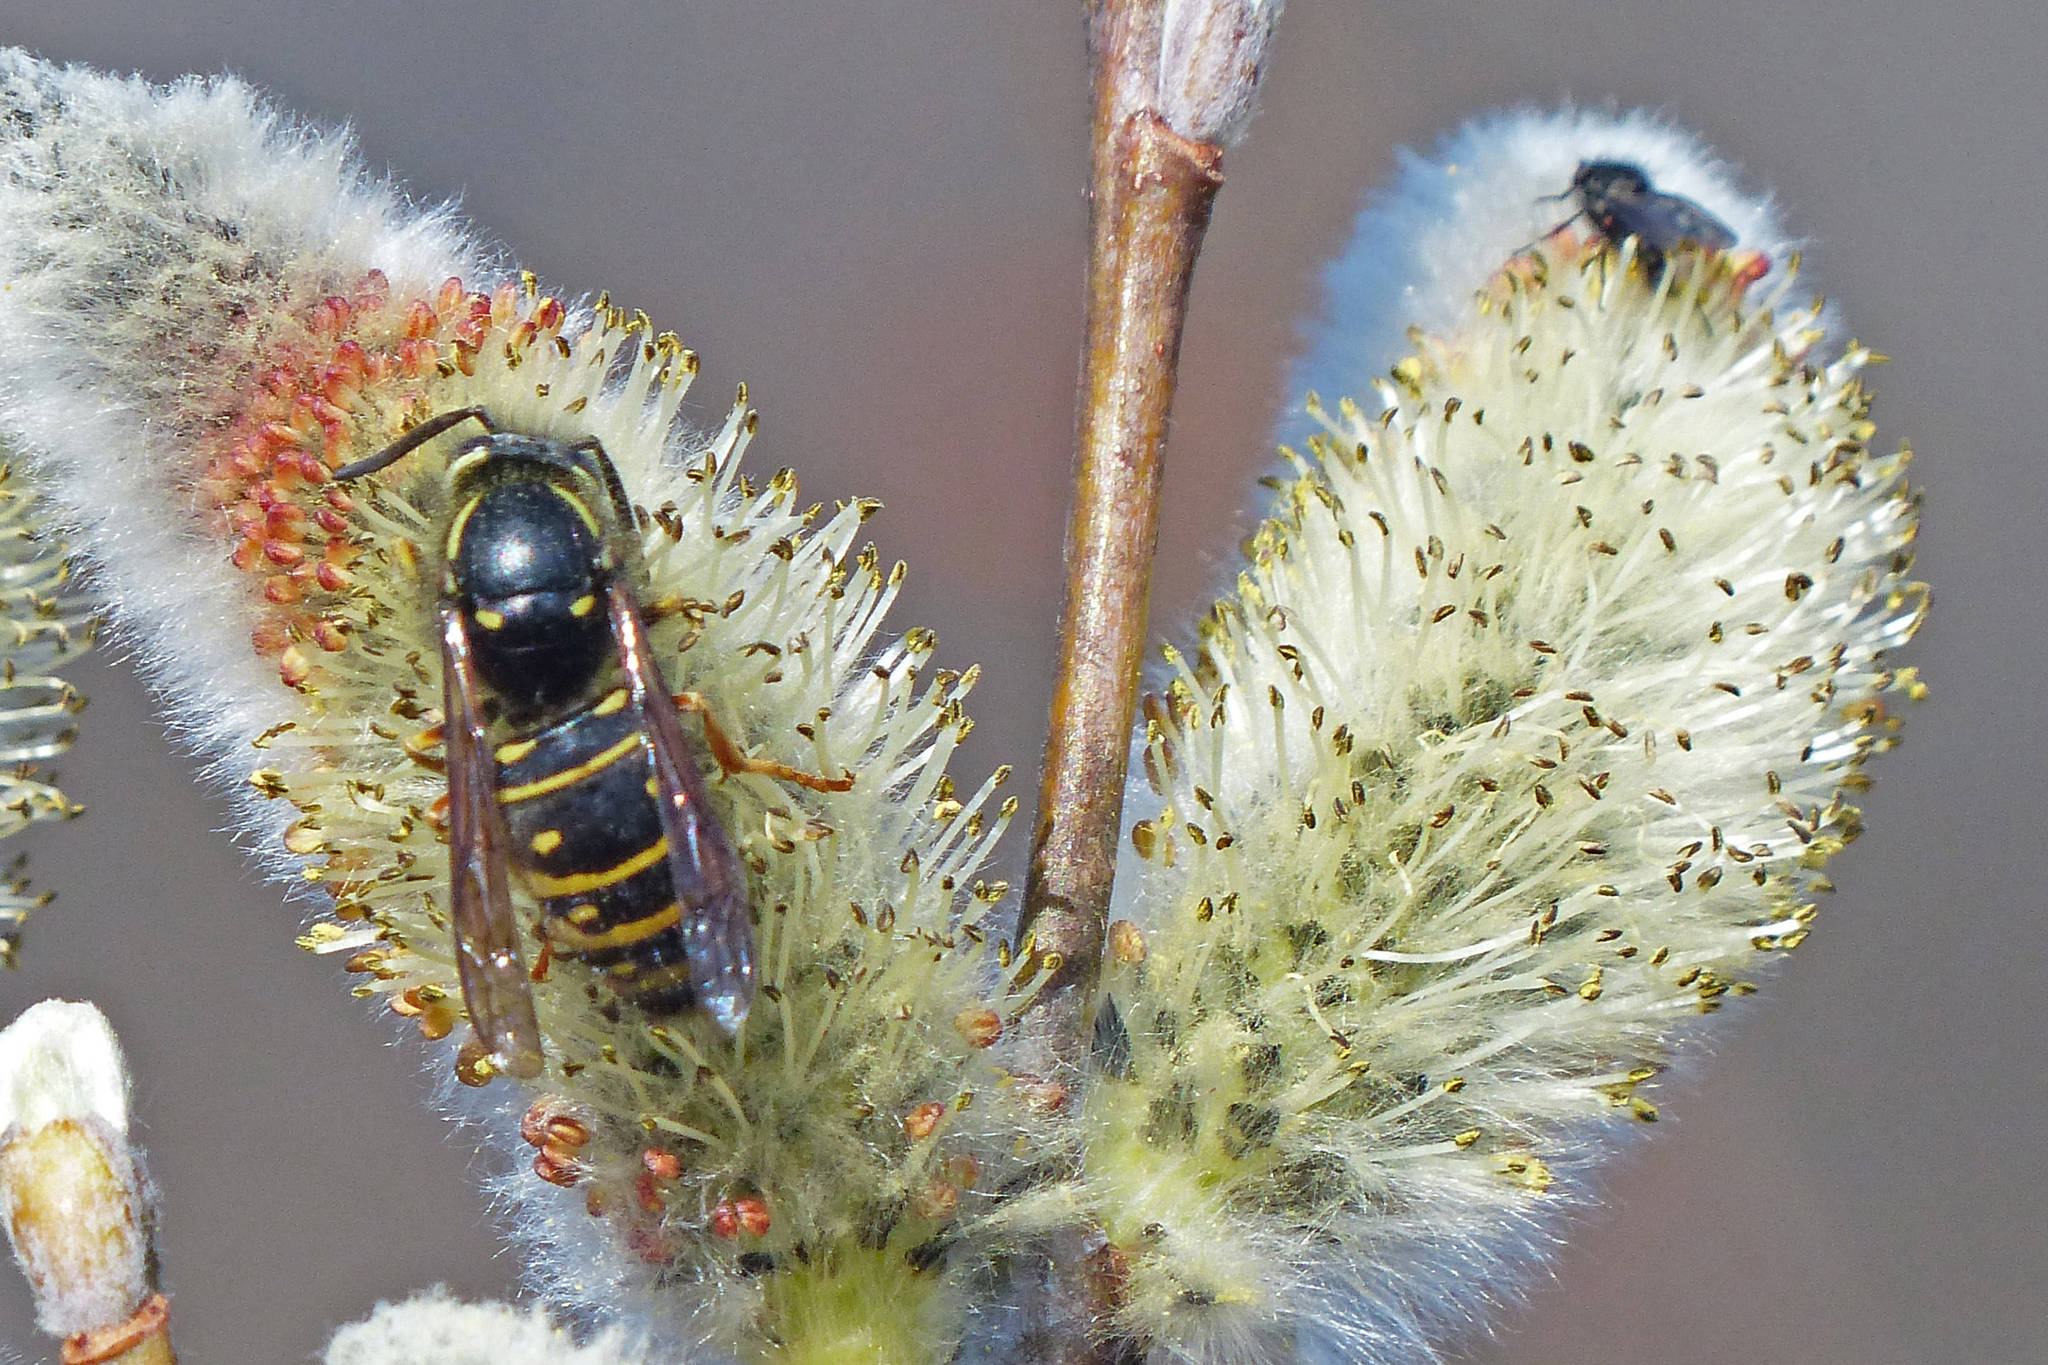 Wasp, yellowjacket, hornet: Do you know the difference?